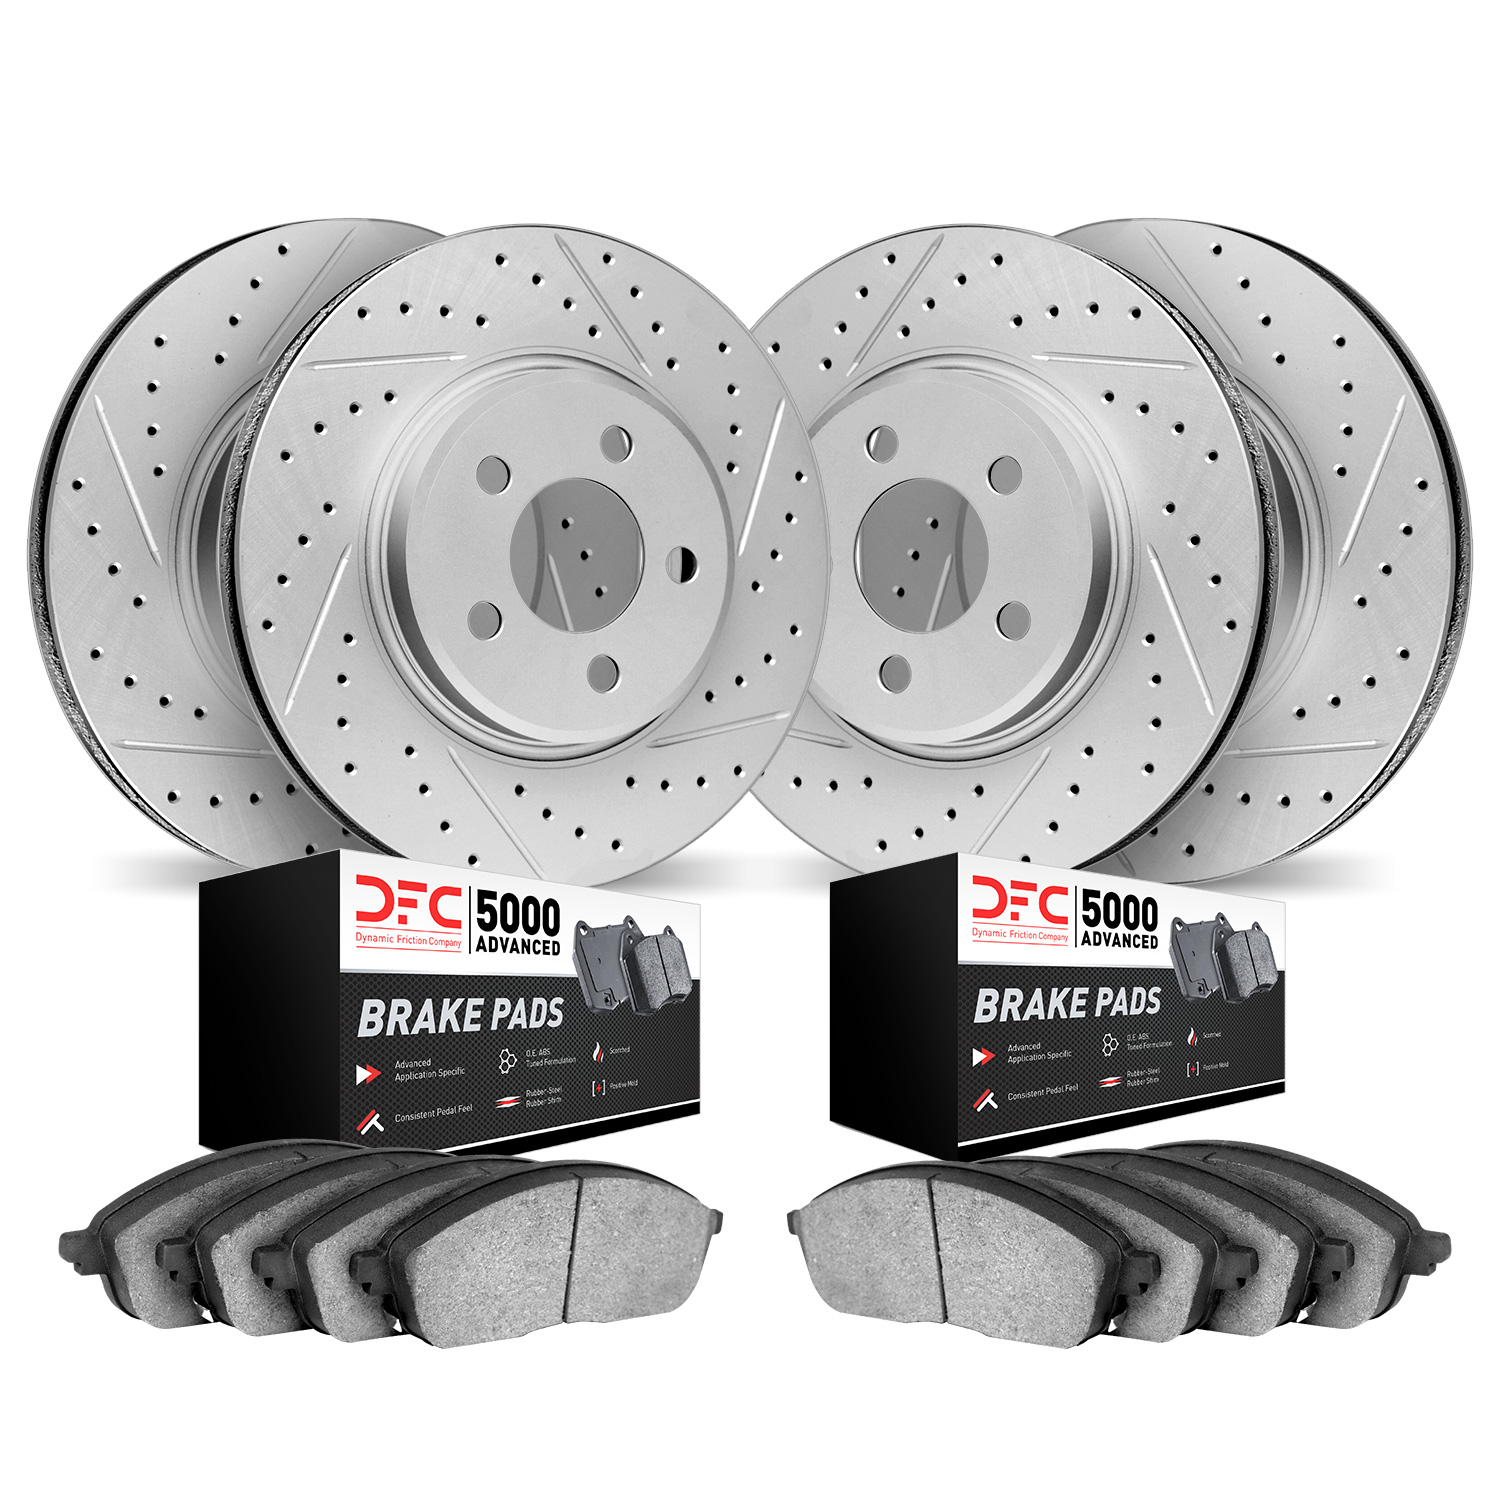 2504-45022 Geoperformance Drilled/Slotted Rotors w/5000 Advanced Brake Pads Kit, 2010-2017 GM, Position: Front and Rear